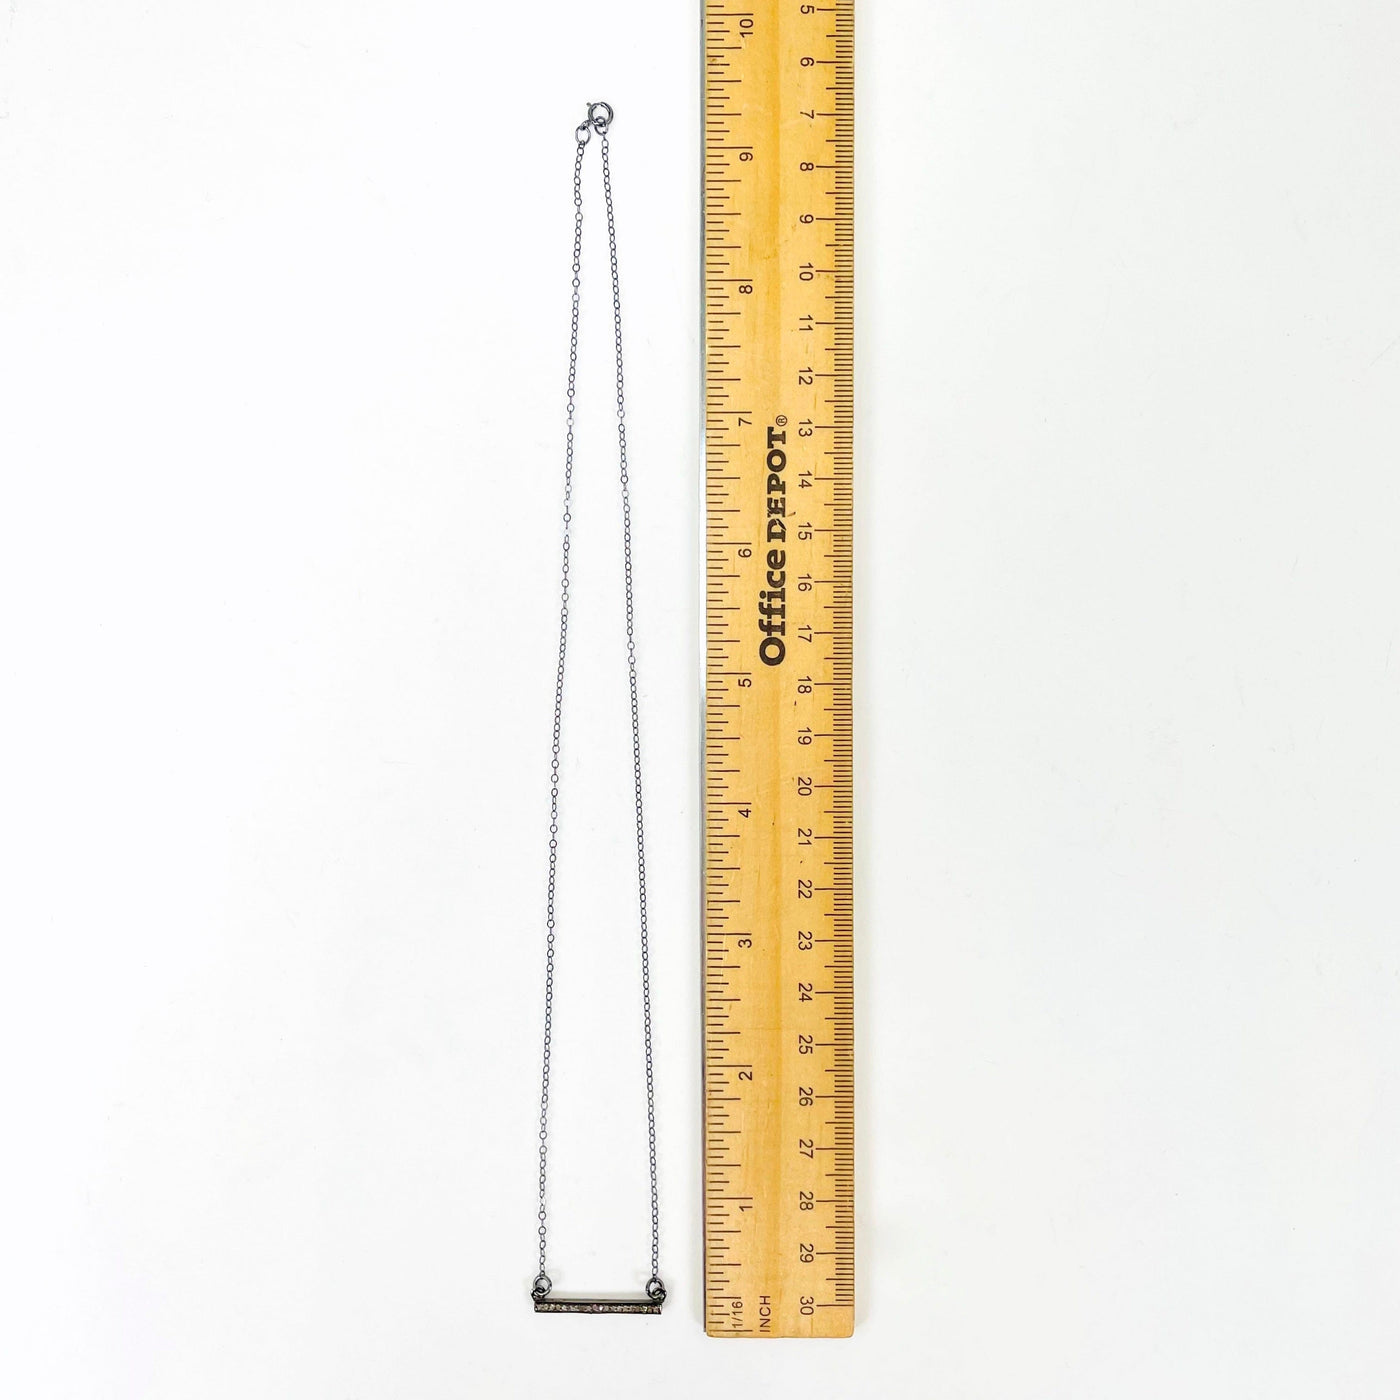 full necklace length next to a ruler for length reference